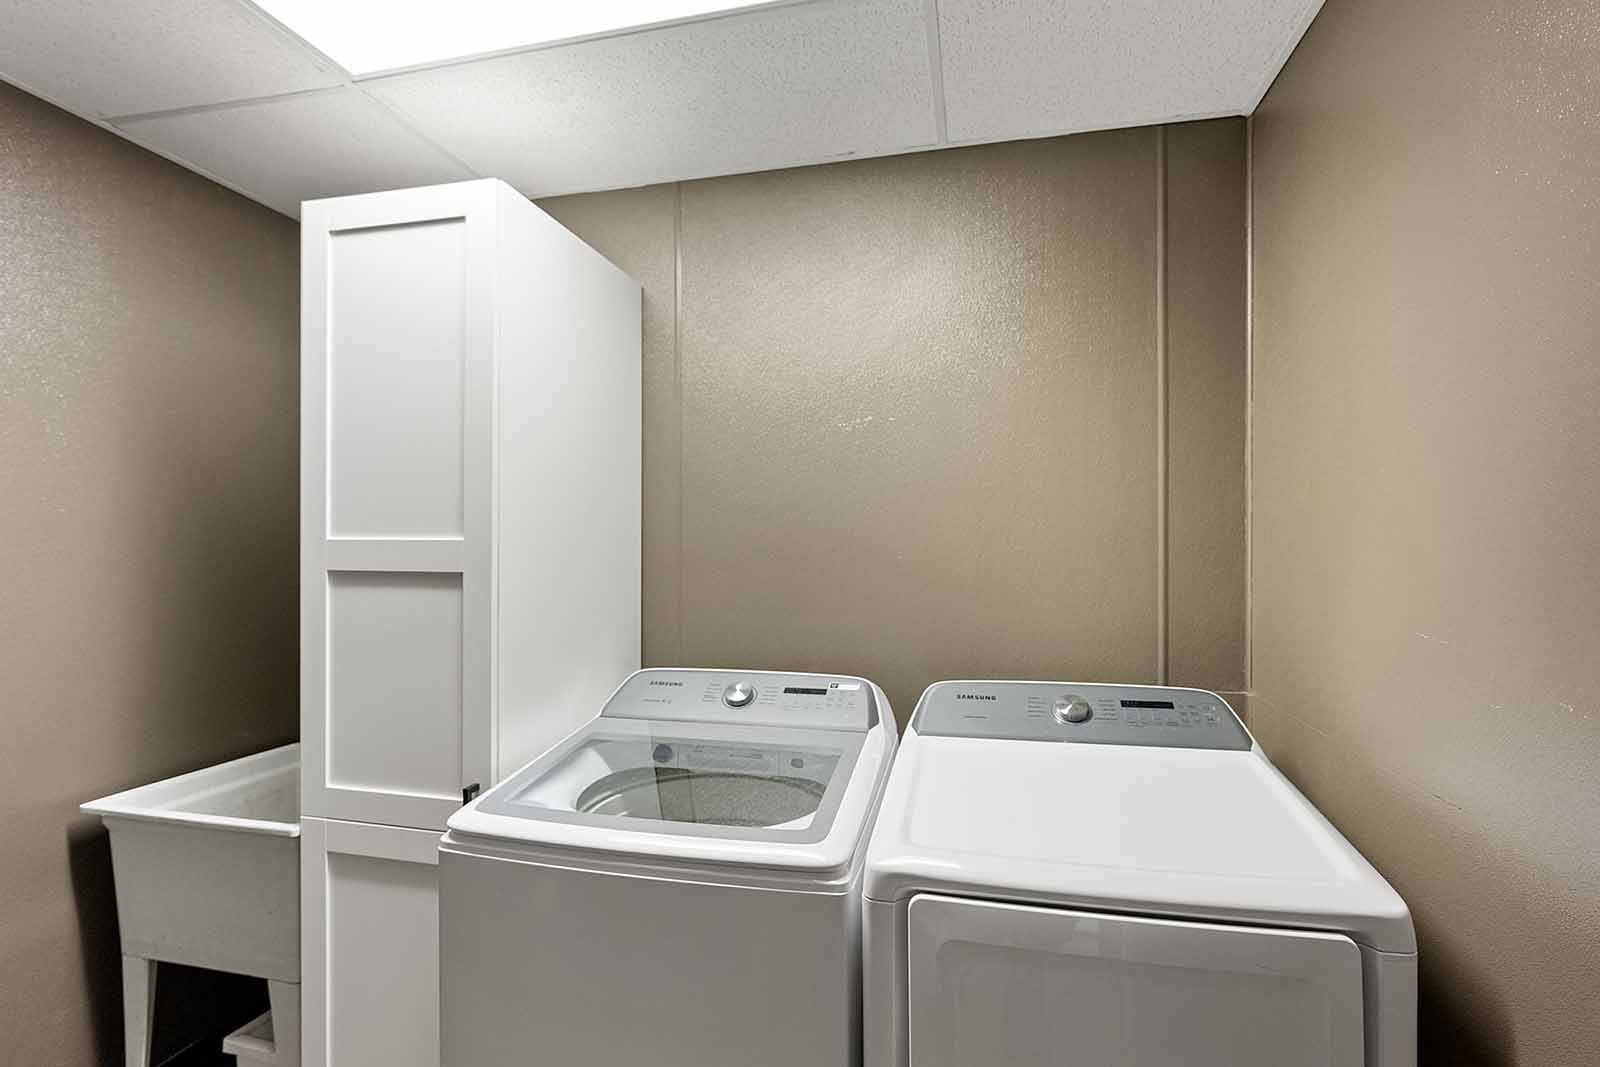 Laundry room with new washer/dryer and utility sink